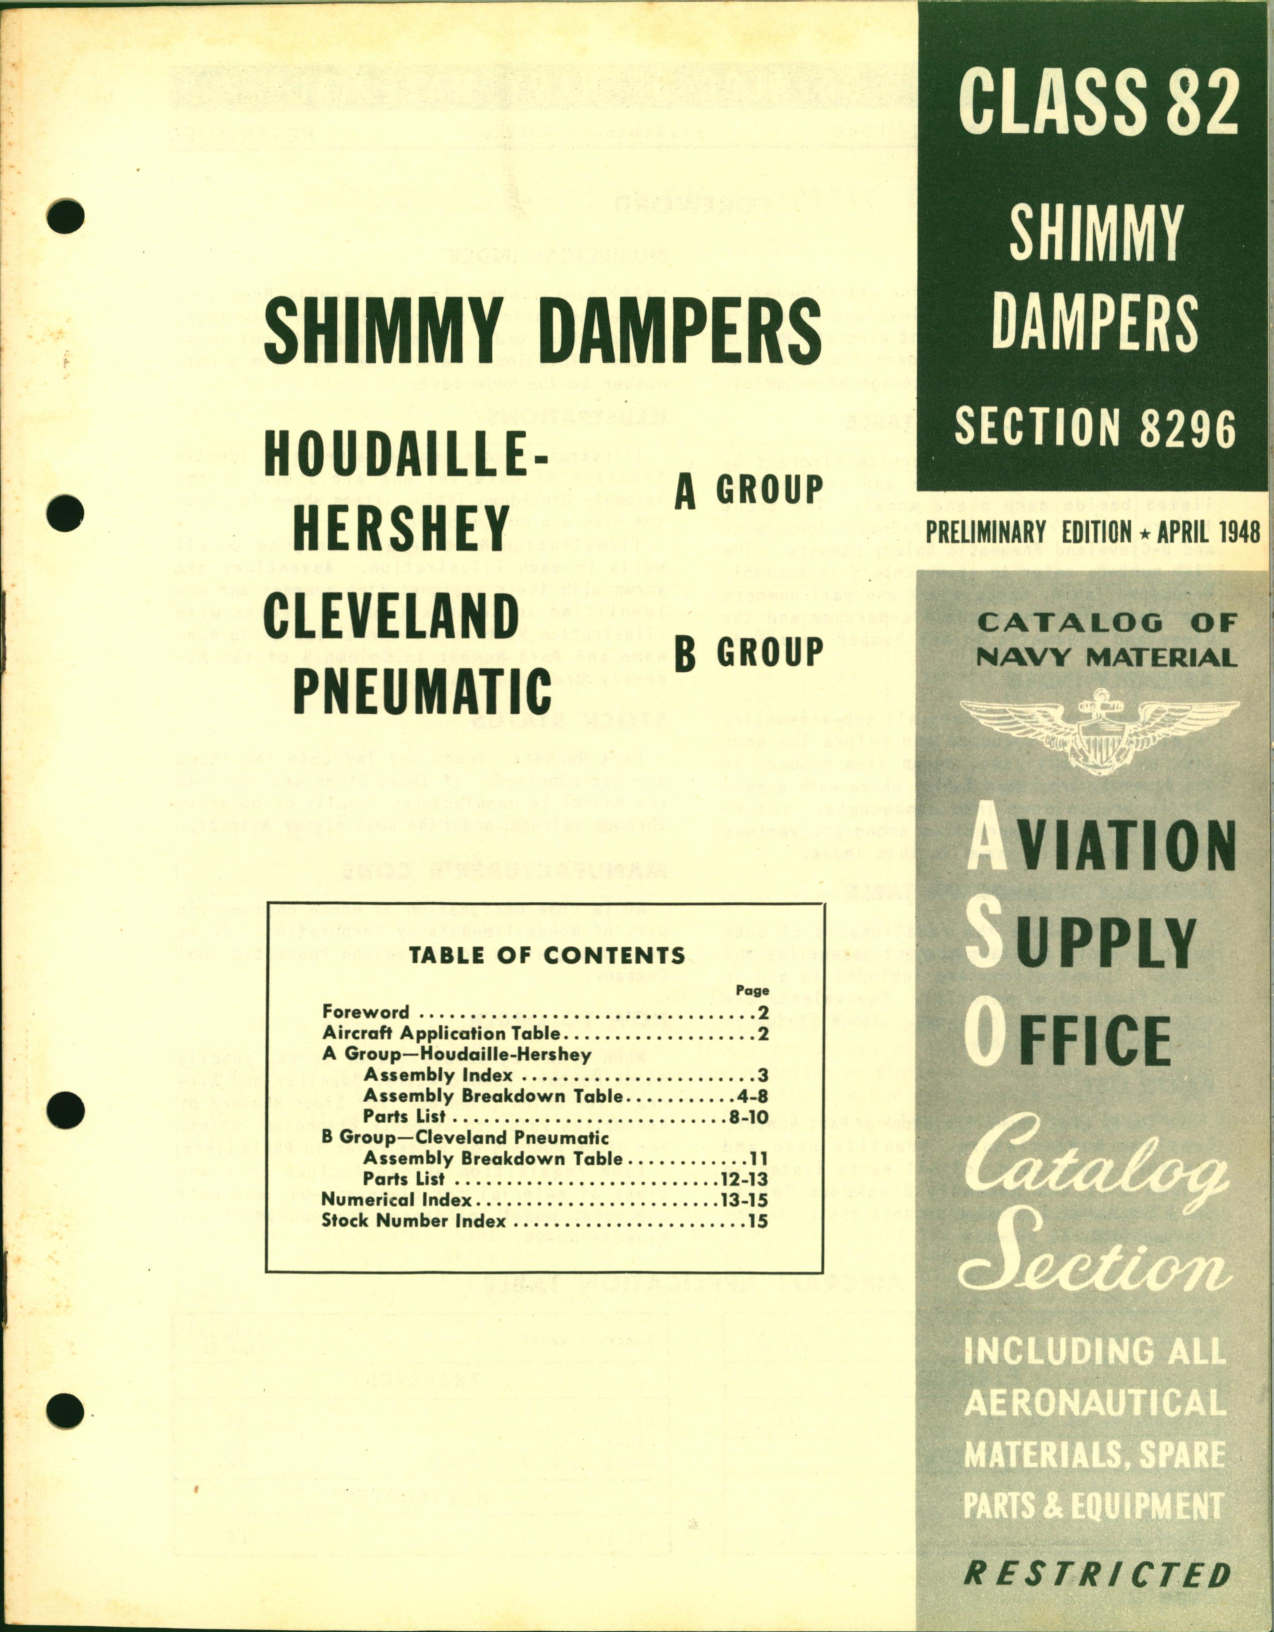 Sample page 1 from AirCorps Library document: Shimmy Dampers for Houdaille Hershey, Cleveland Pneumatic 